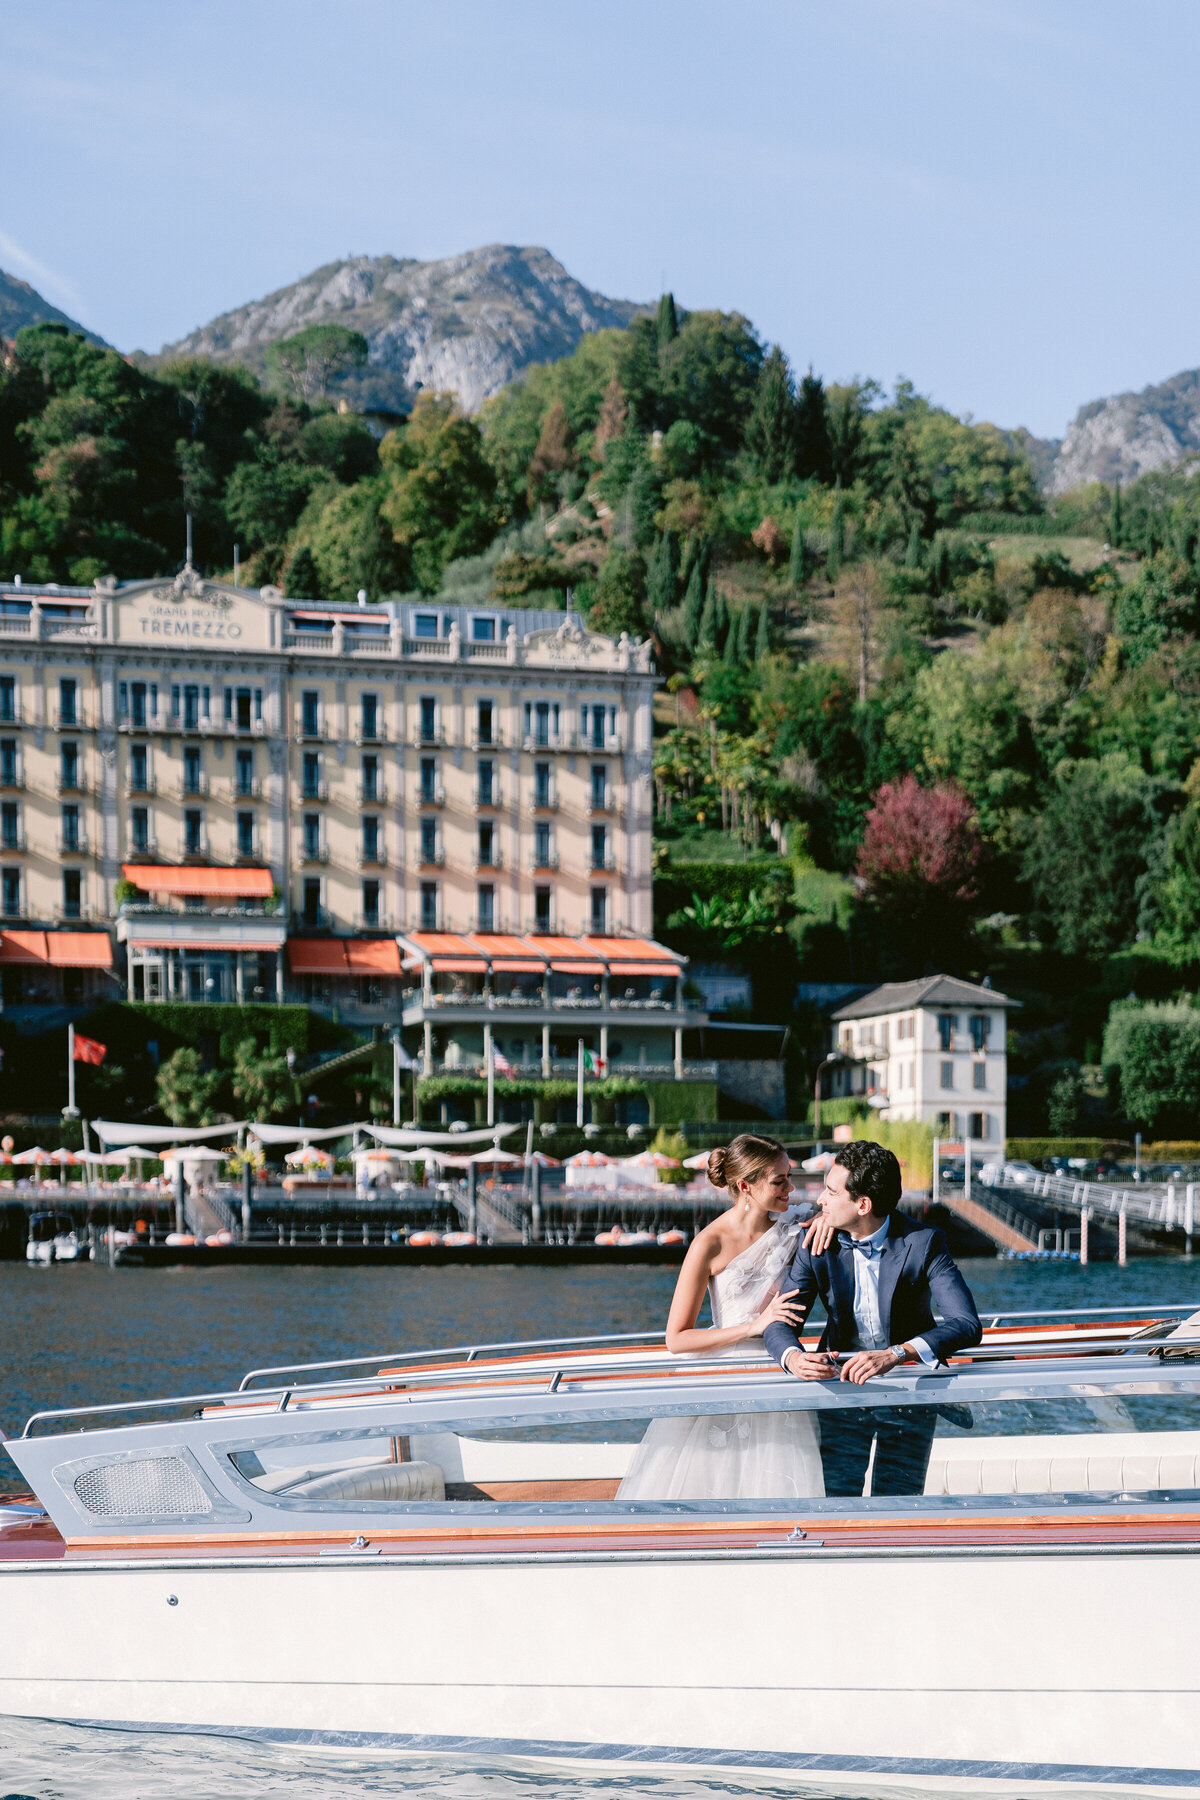 Couple on a private boat on lake como overlooking the Hotel Tremezzo